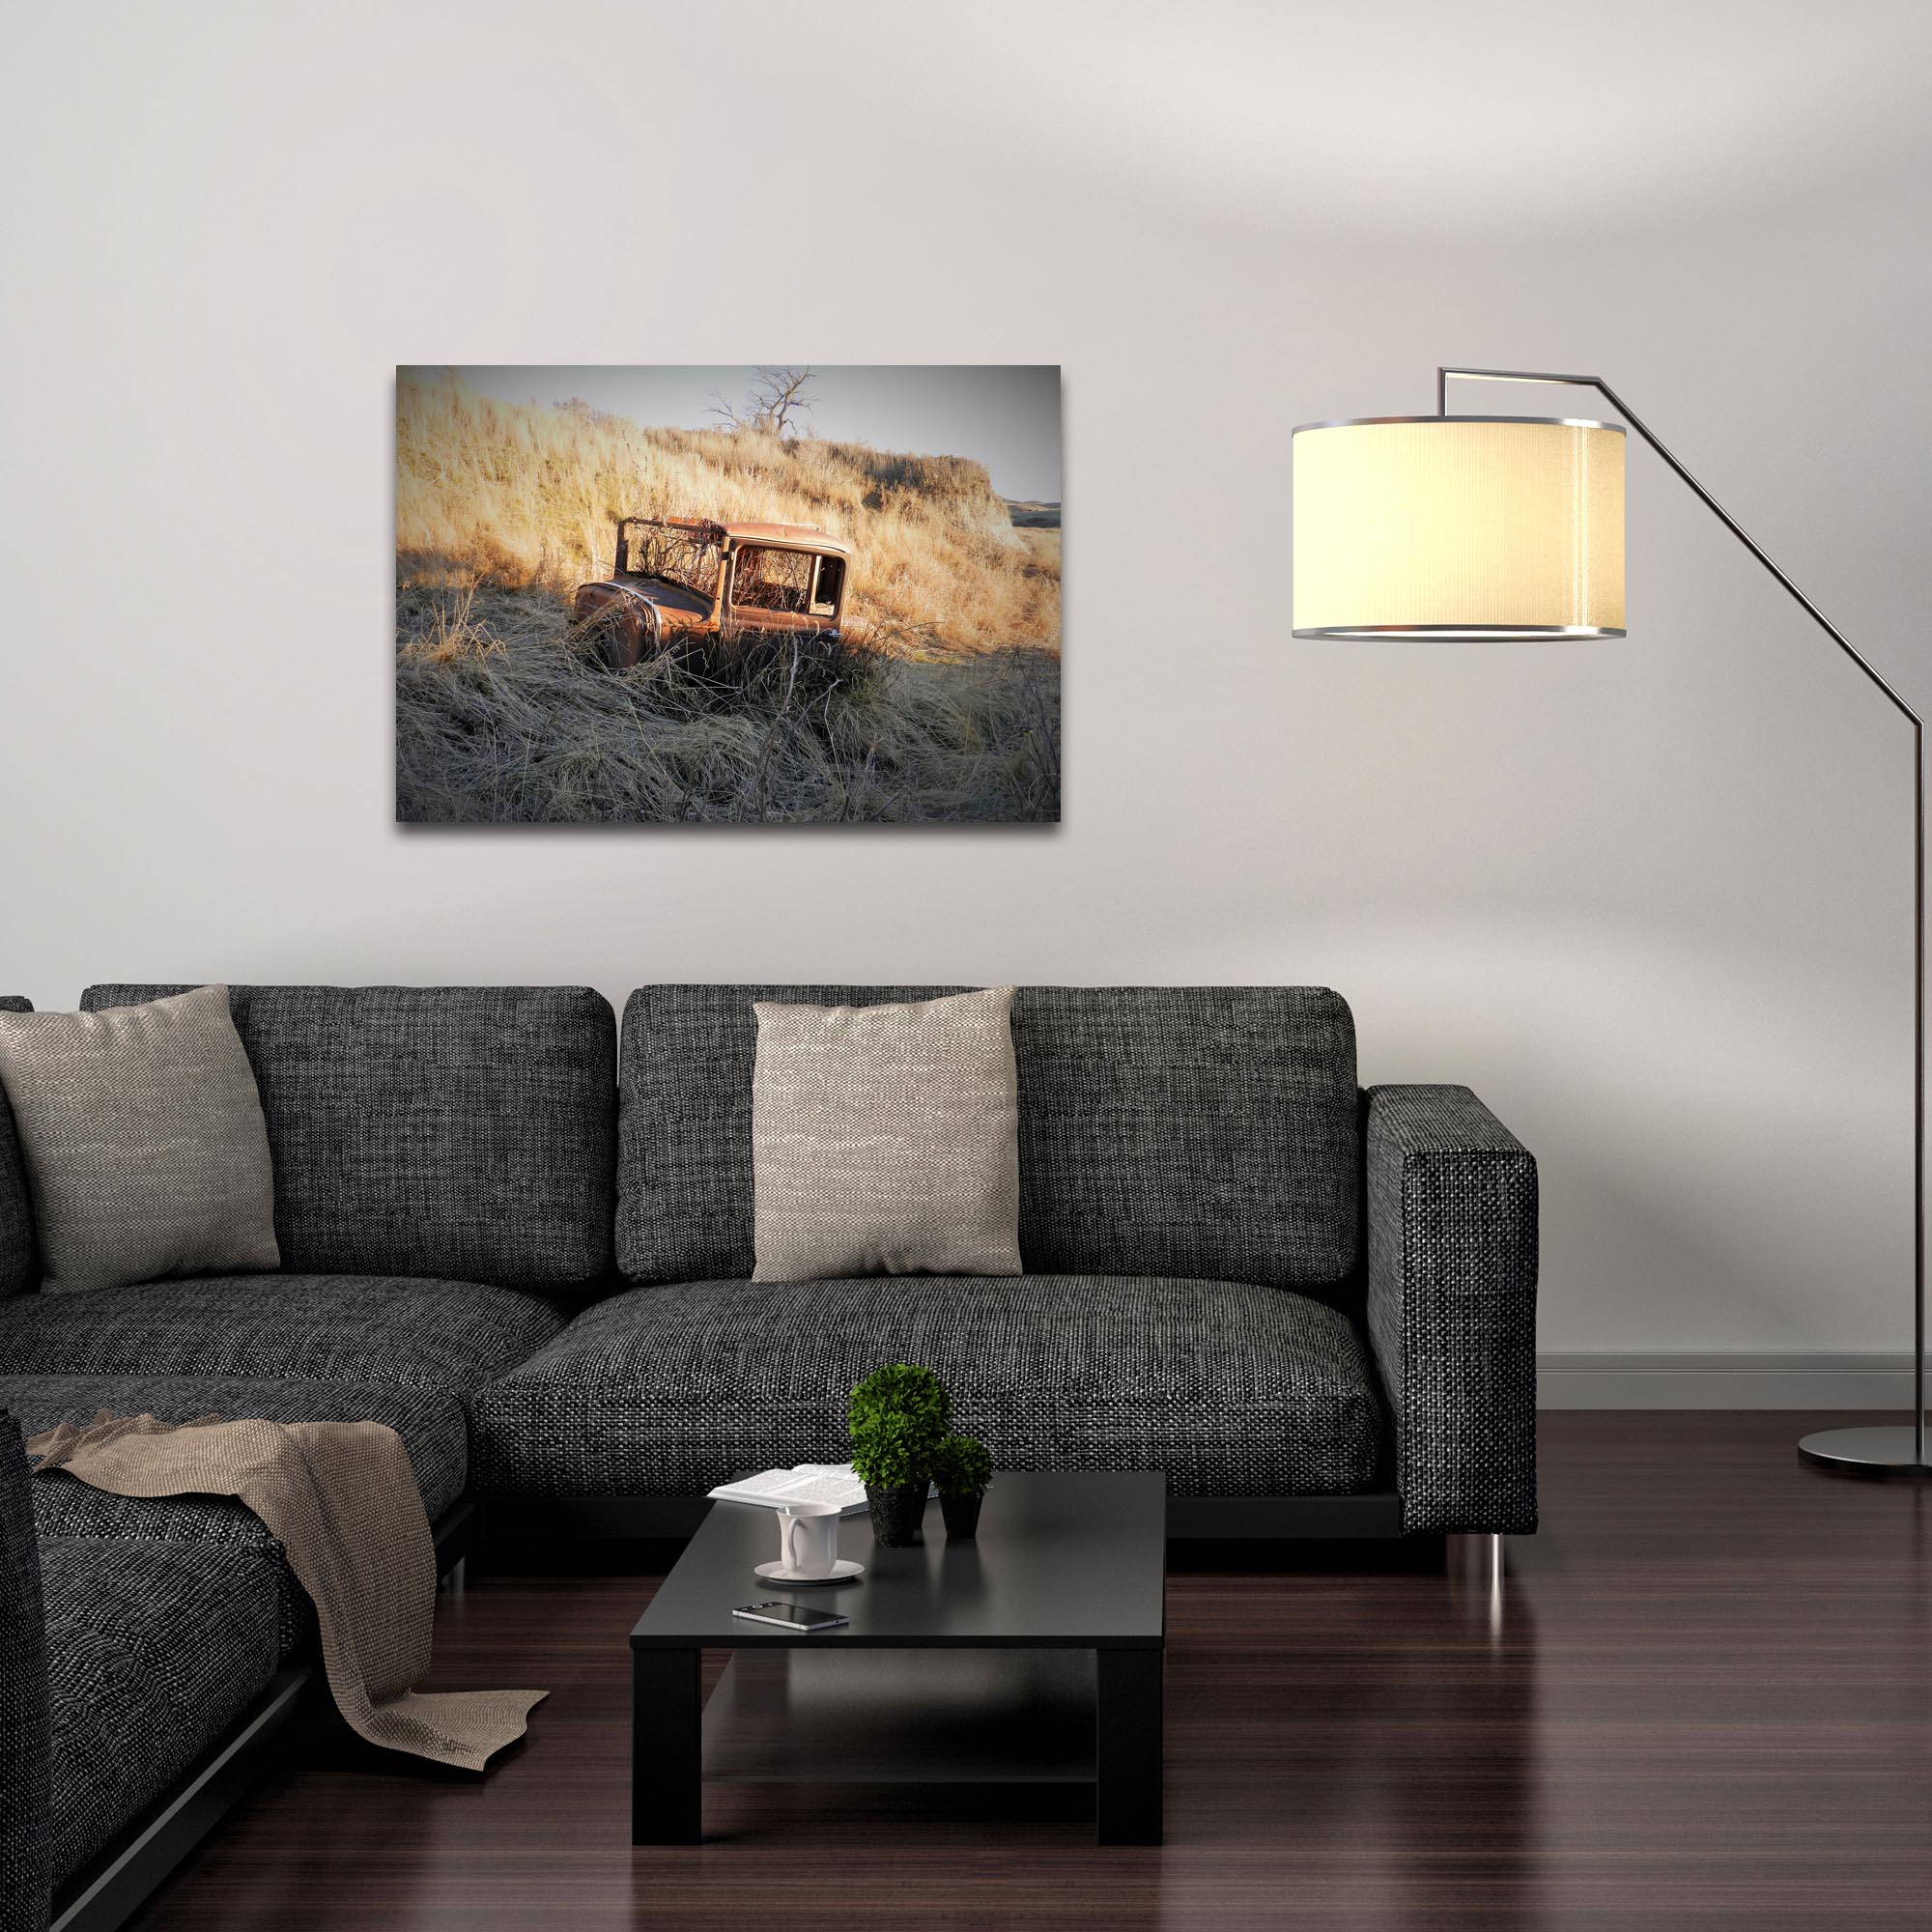 Western Wall Art 'The Passage' - American West Decor on Metal or Plexiglass - Lifestyle View